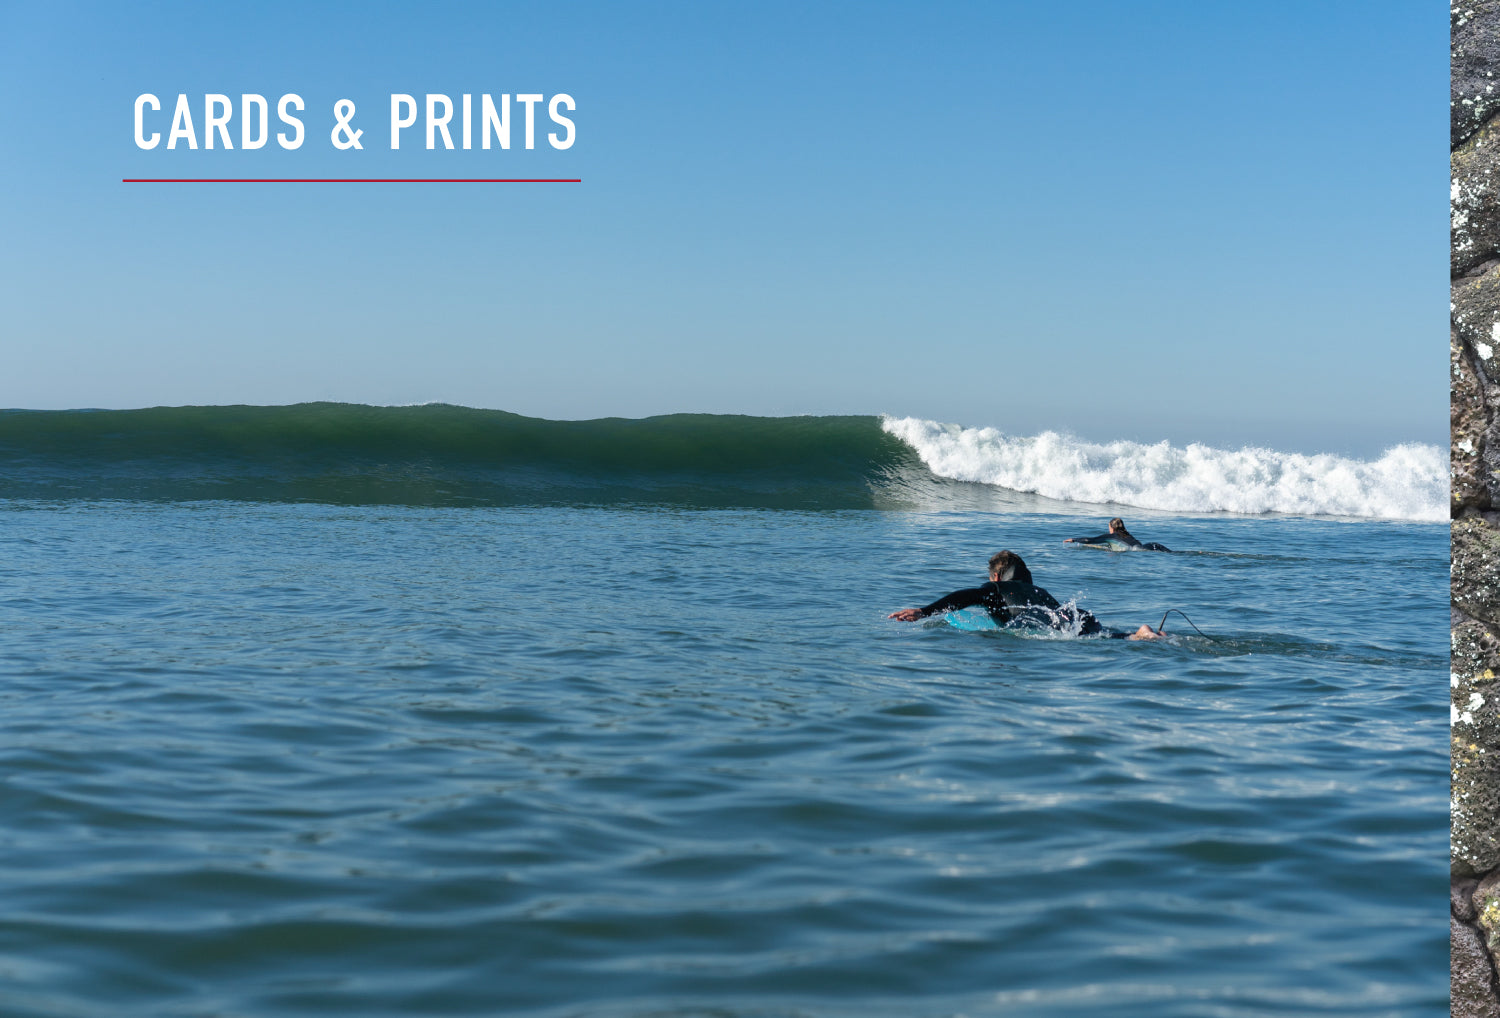 Cards & prints header. Two surfers paddling out with wave coming in.